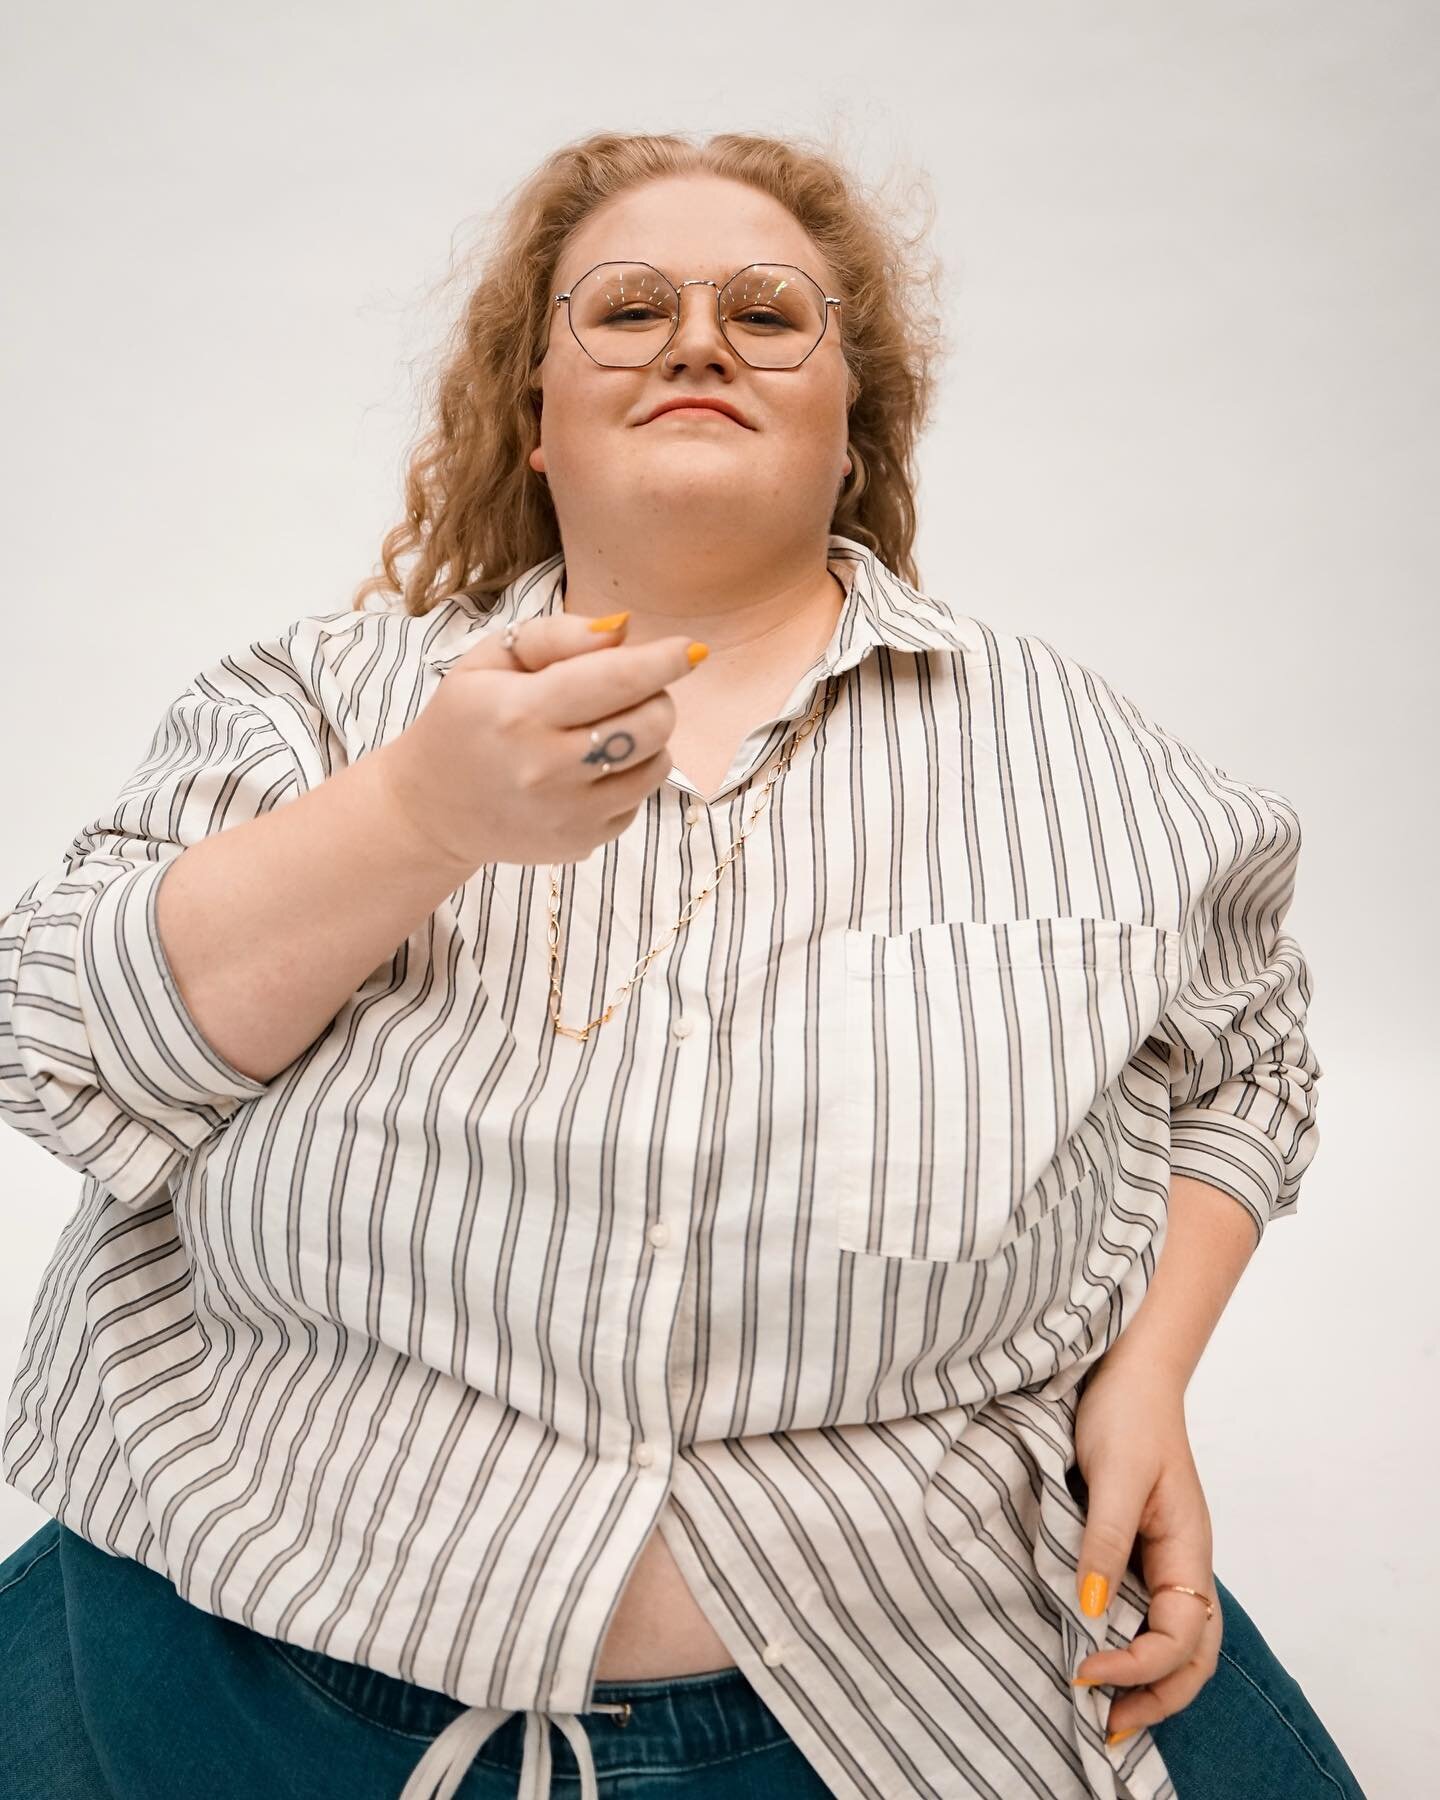 Introducing the models for &lsquo;Fat People in Photos&rsquo; - next, ✨ MADDY ✨ @mdjquinnstagram 

ABOUT MADDY:  Maddy is a fat, queer, neurodivergent artist living it up in Mohkinstis. She is rambunctious&nbsp;and loud af, but also is (not-so-secret